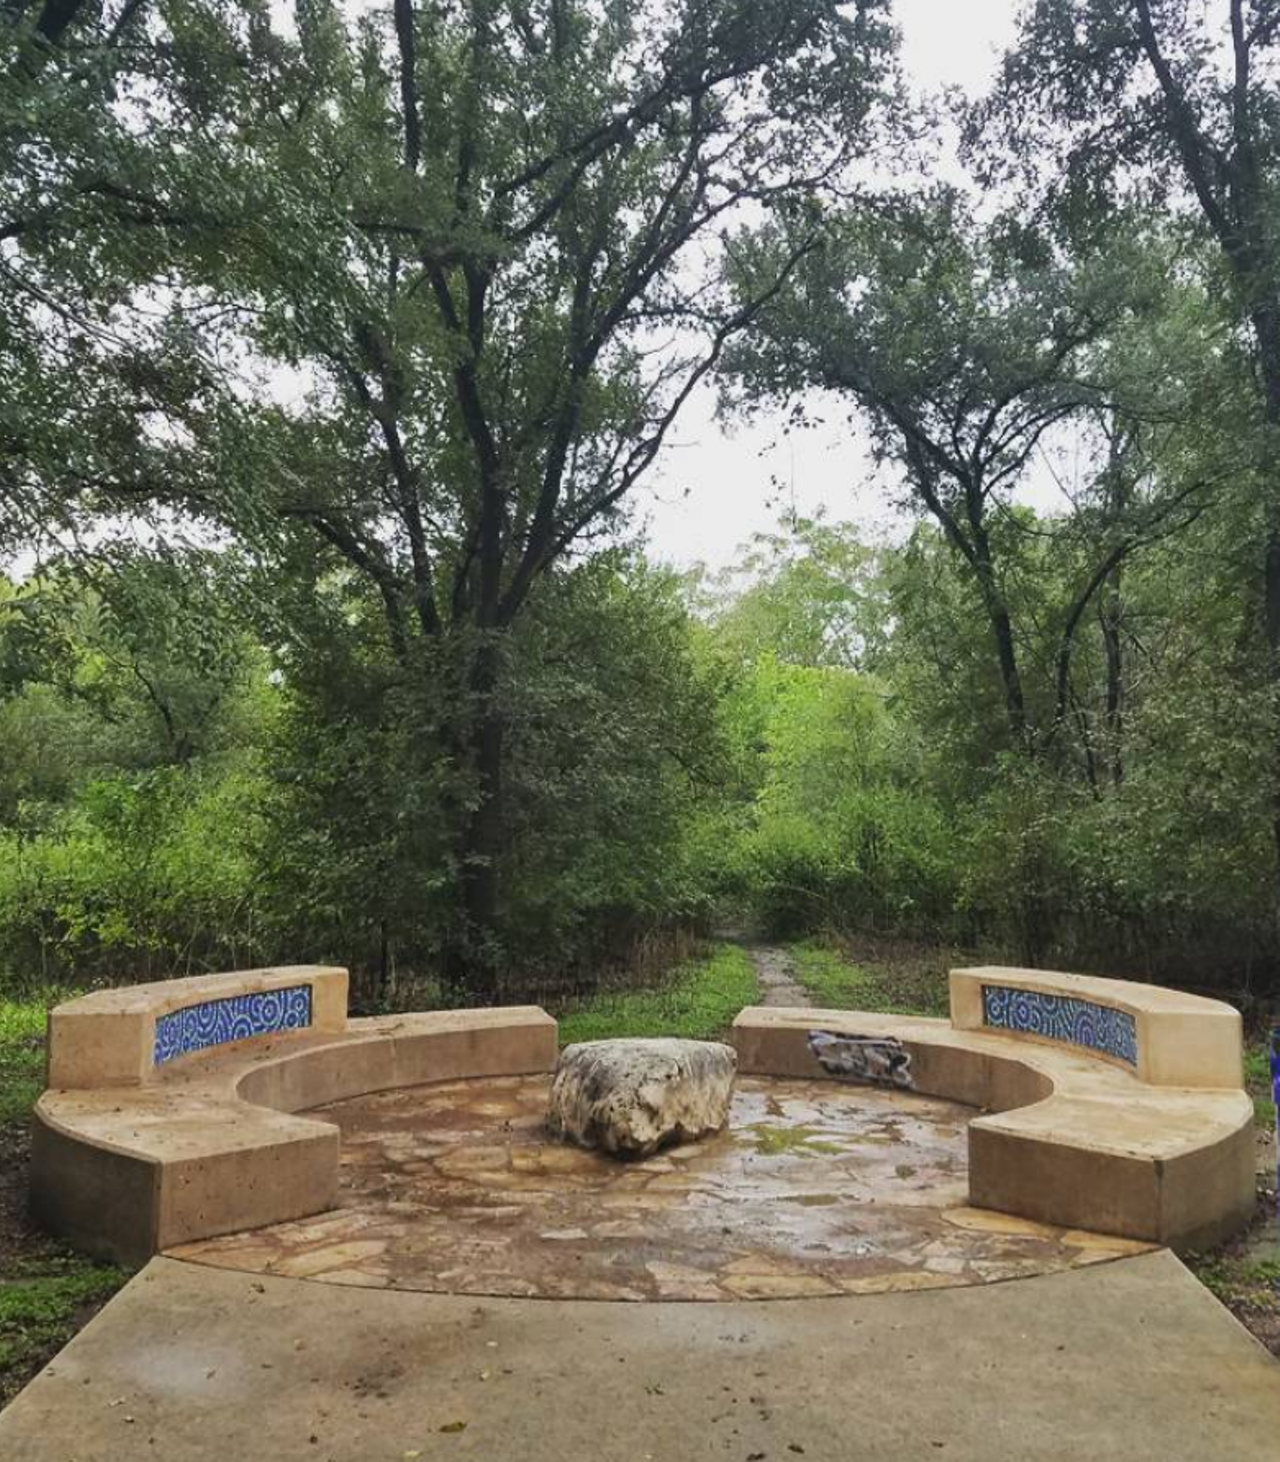 This 505-acre city park has just about everything you could think of: A disc golf course, expansive dog park, delightful public sculptures, a “fitness challenge zone,” skate park, playground, dozens of picnic areas, and a splash pool for kids. There’s something for every single member of the family. Visit the Southwest San Antonio park (right next to Lackland Air Force Base) and choose your own adventure.
Photo via Instagram / doralinz